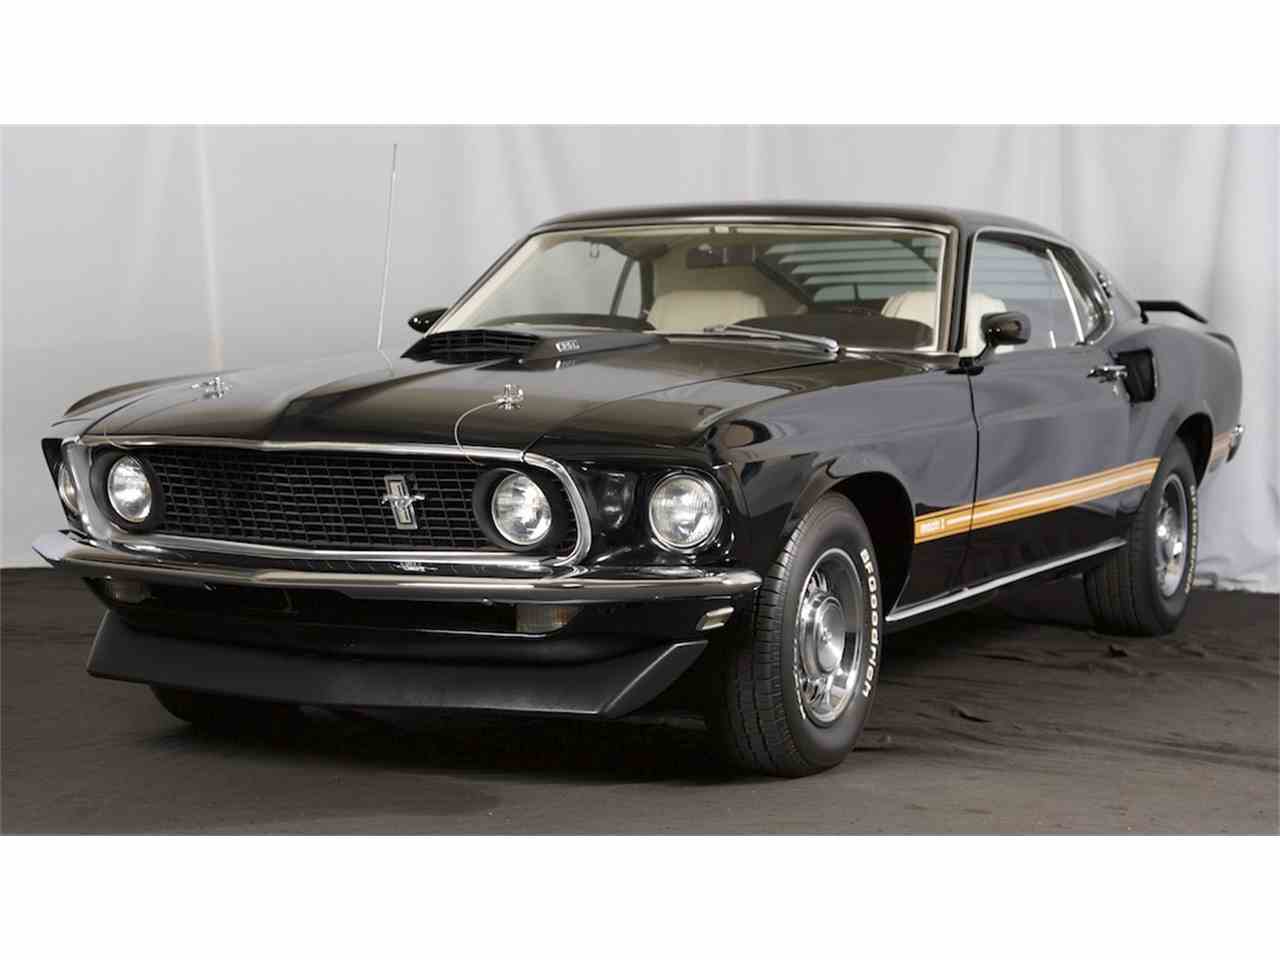 1969 Ford Mustang Mach 1 for Sale | ClassicCars.com | CC-993370